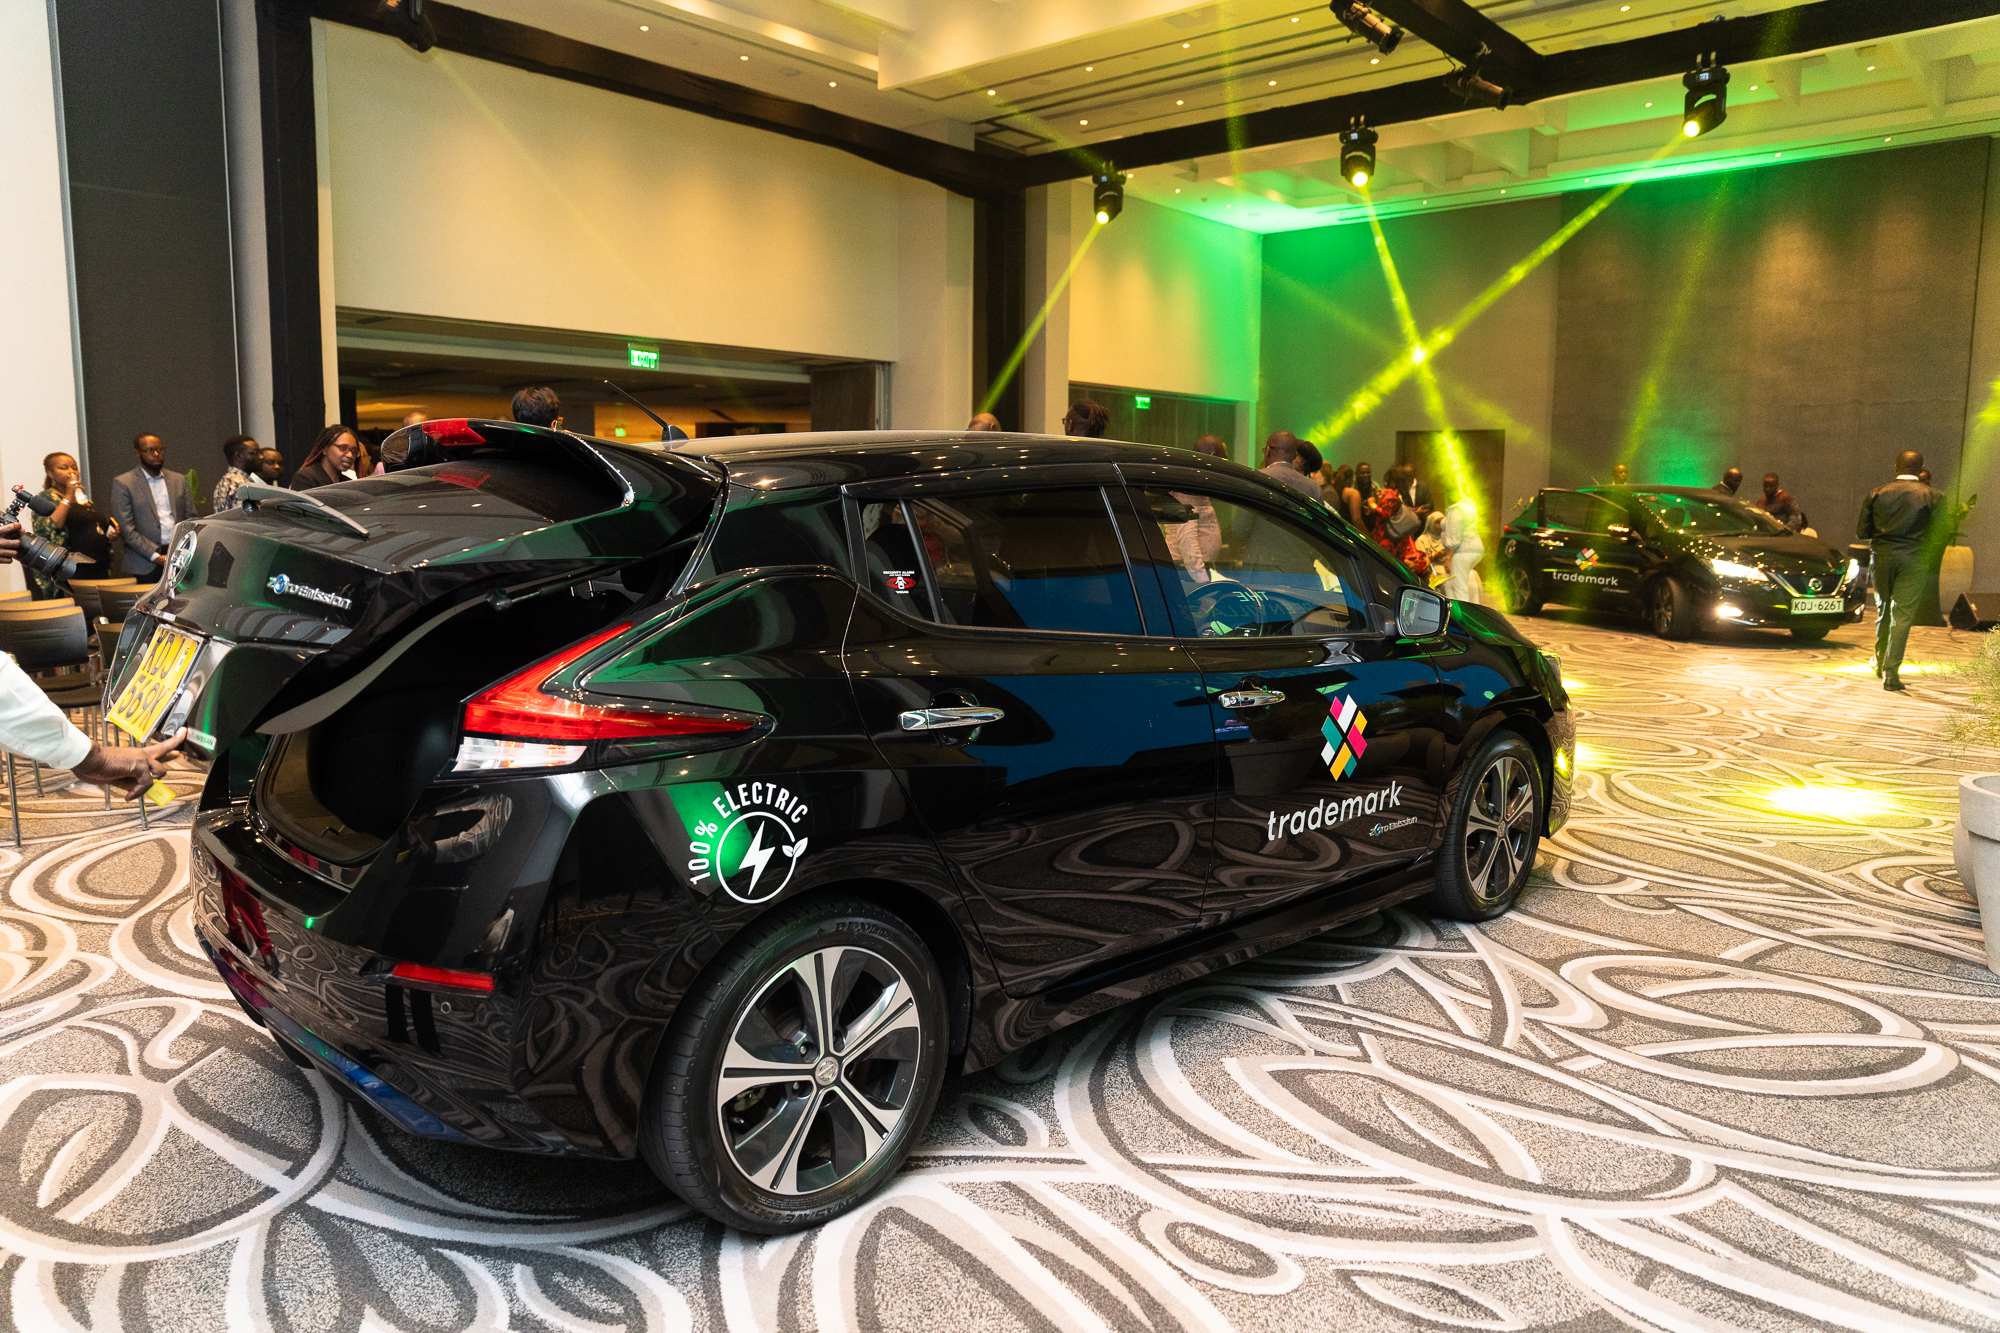 Trademark Hotel Electric Car launch - 167